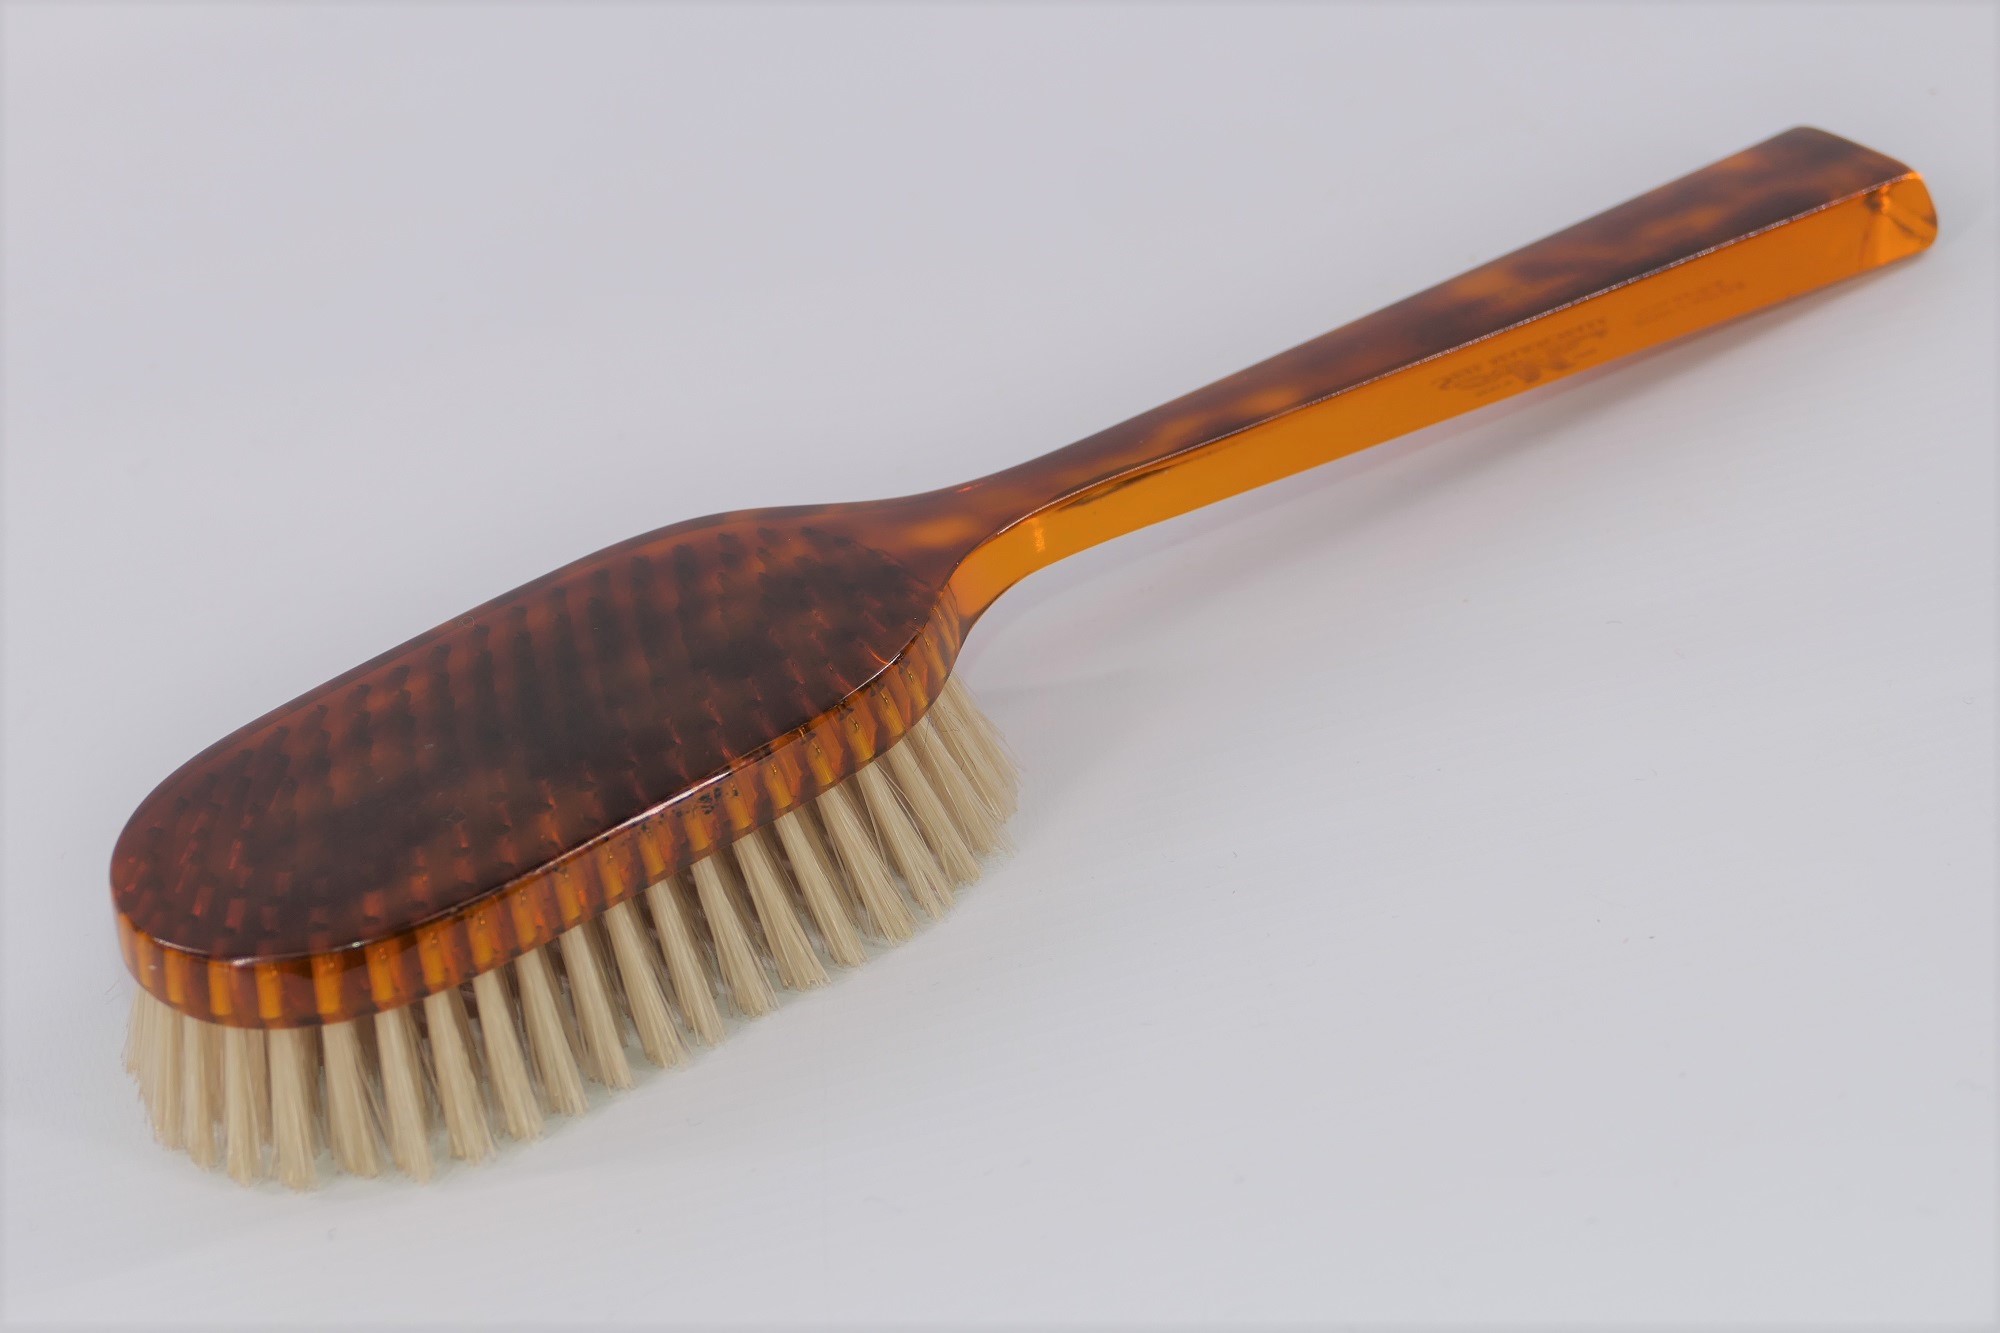 Bath brush made from cellusose acetate